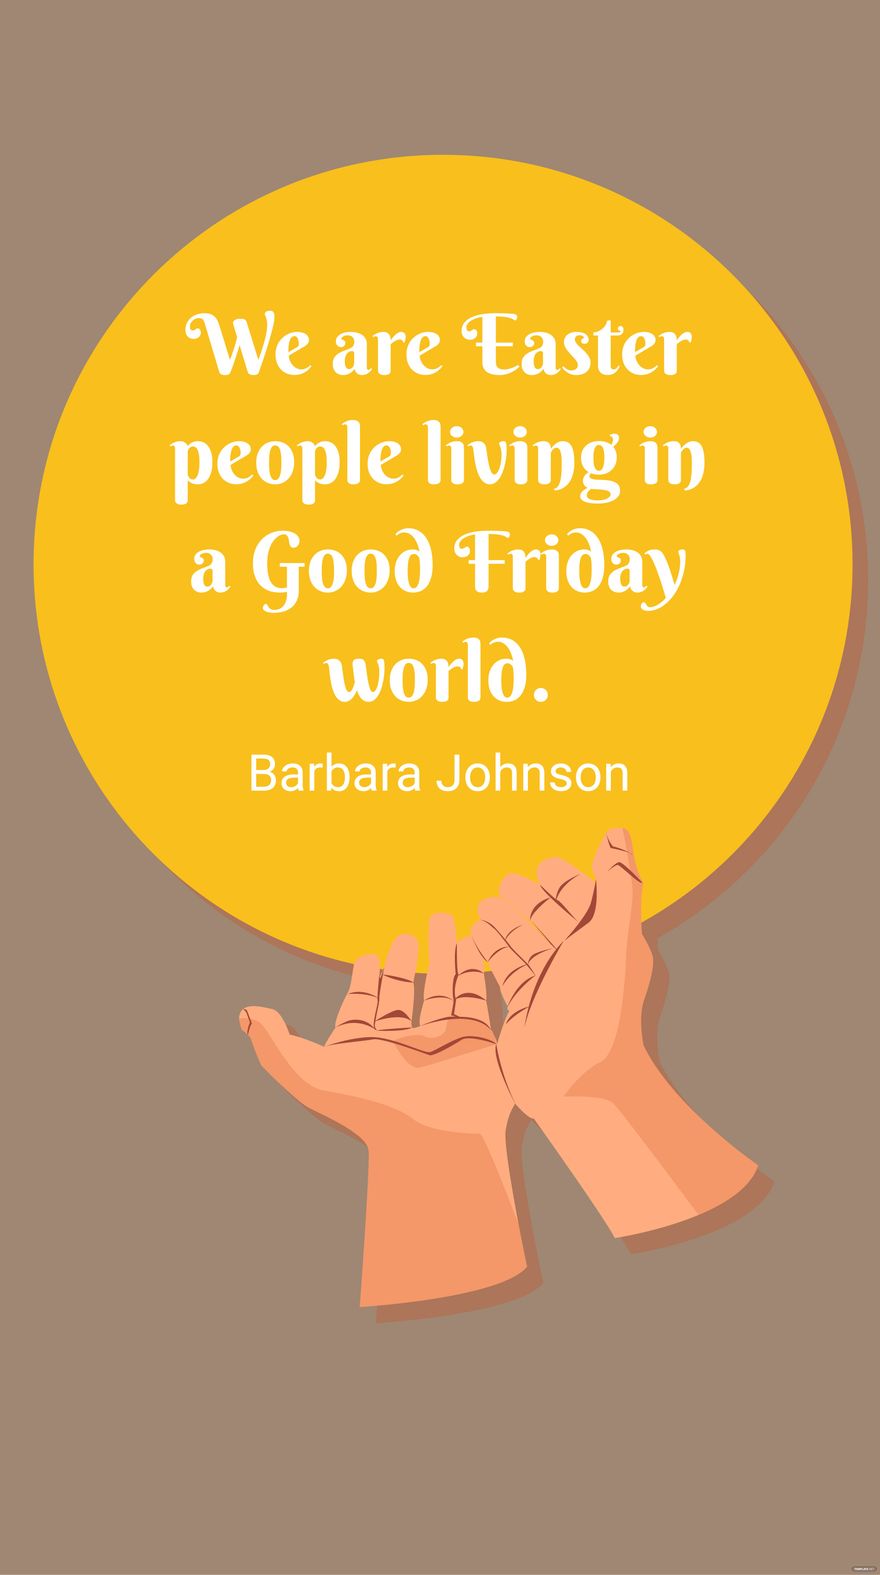 Barbara Johnson - We are Easter people living in a Good Friday world. in JPG